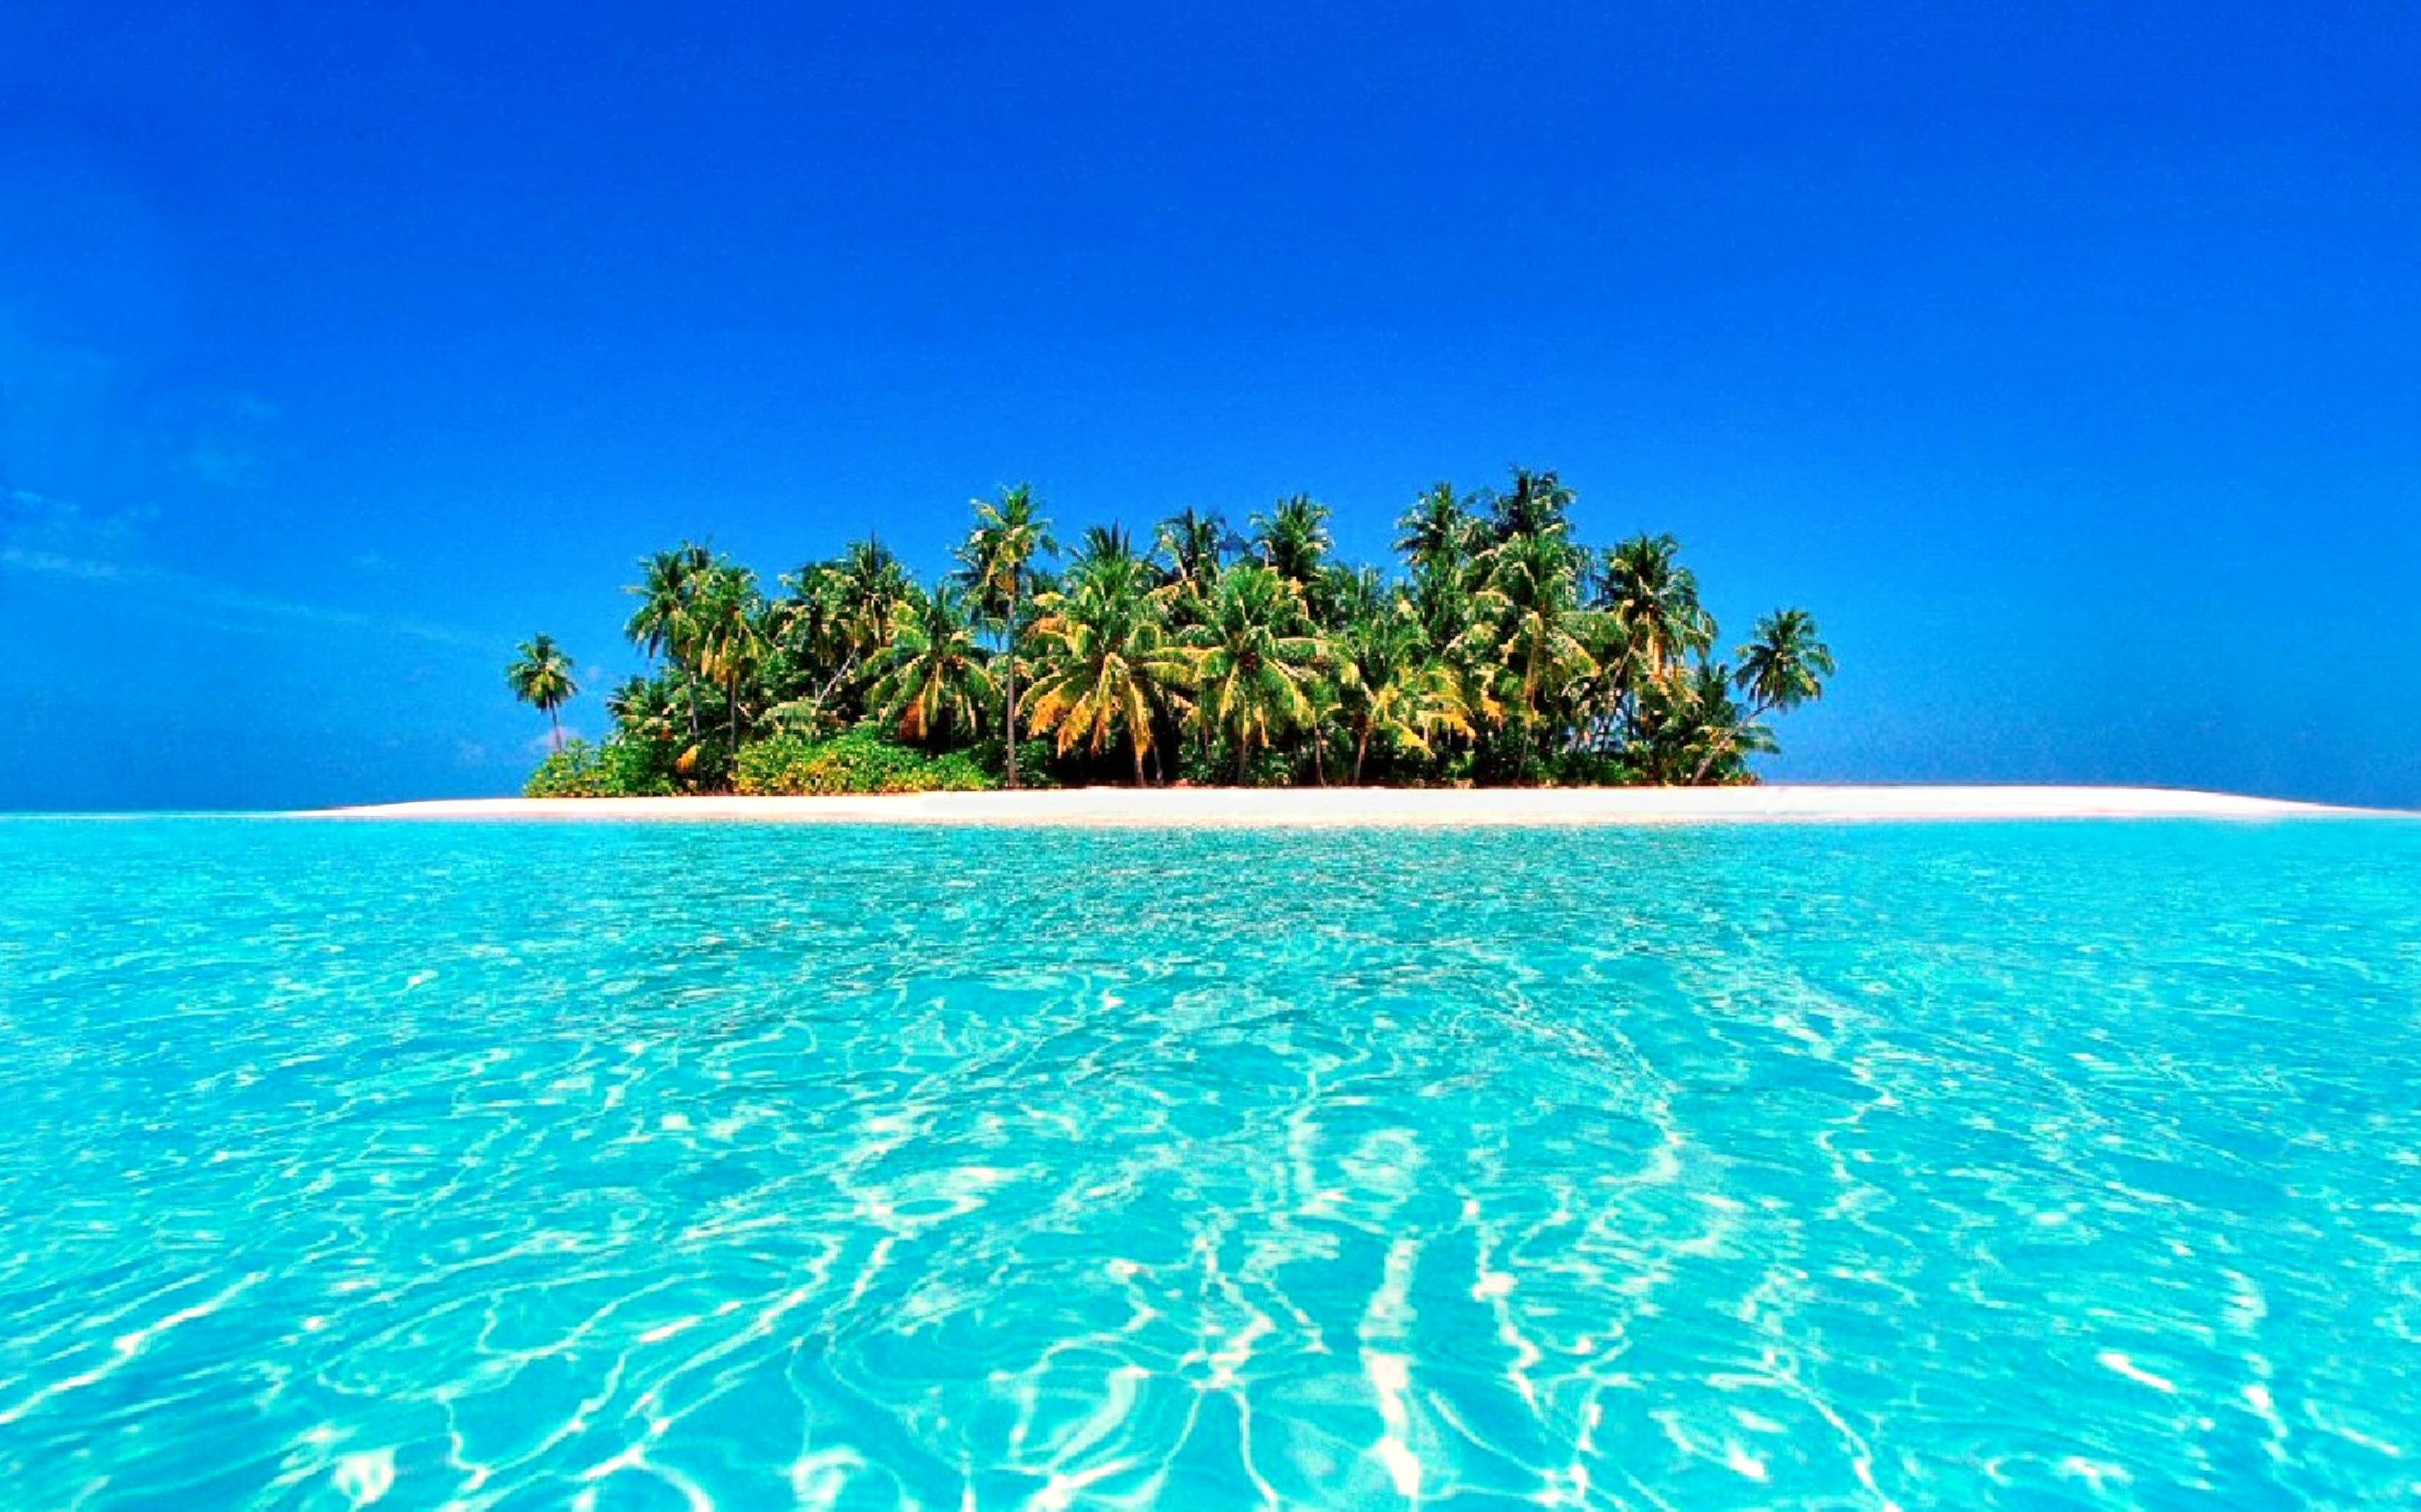 Tropical Wallpapers